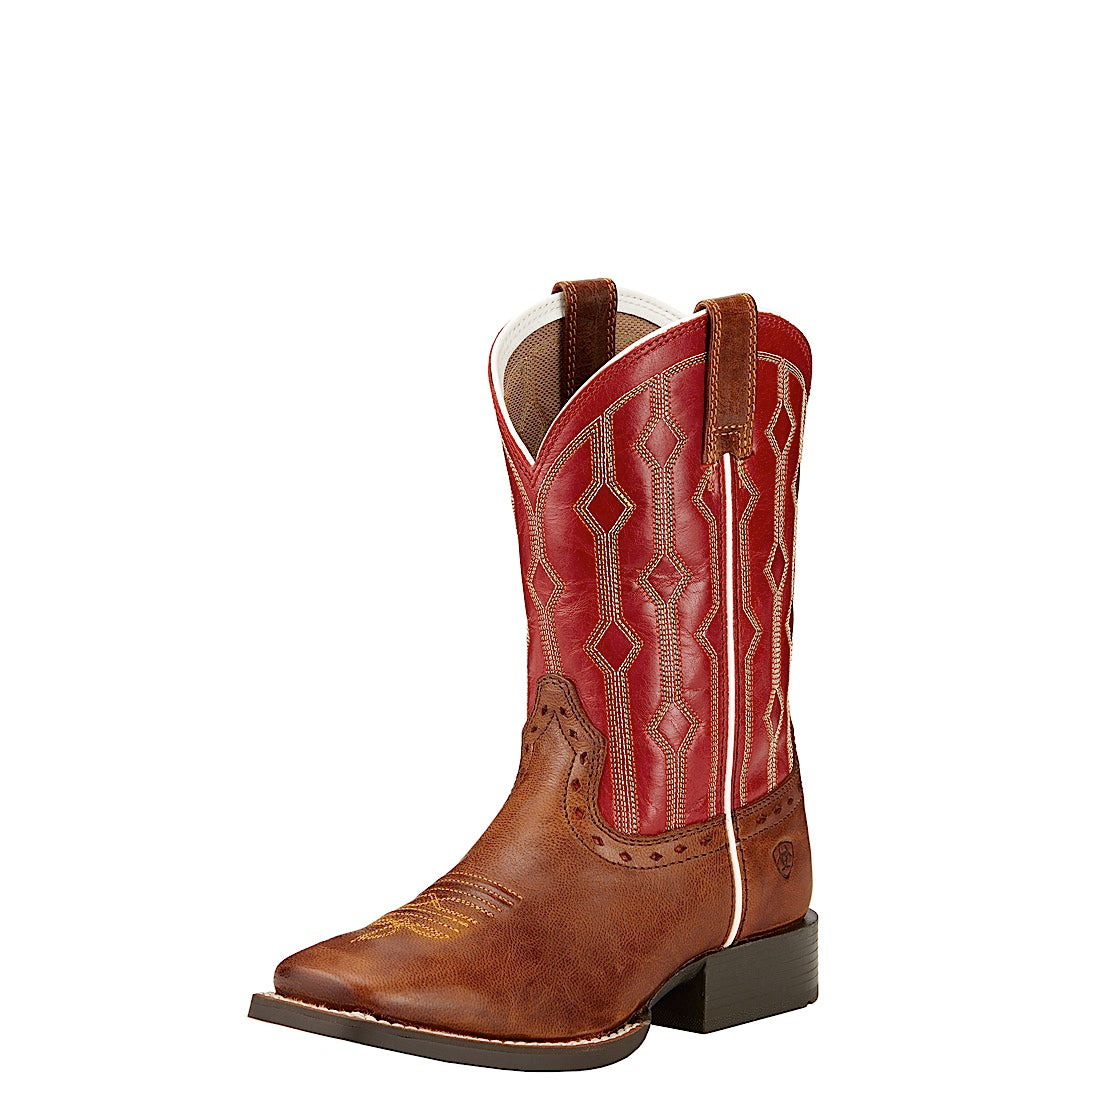 Ariat Kids Live Wire Wood/Mega Red